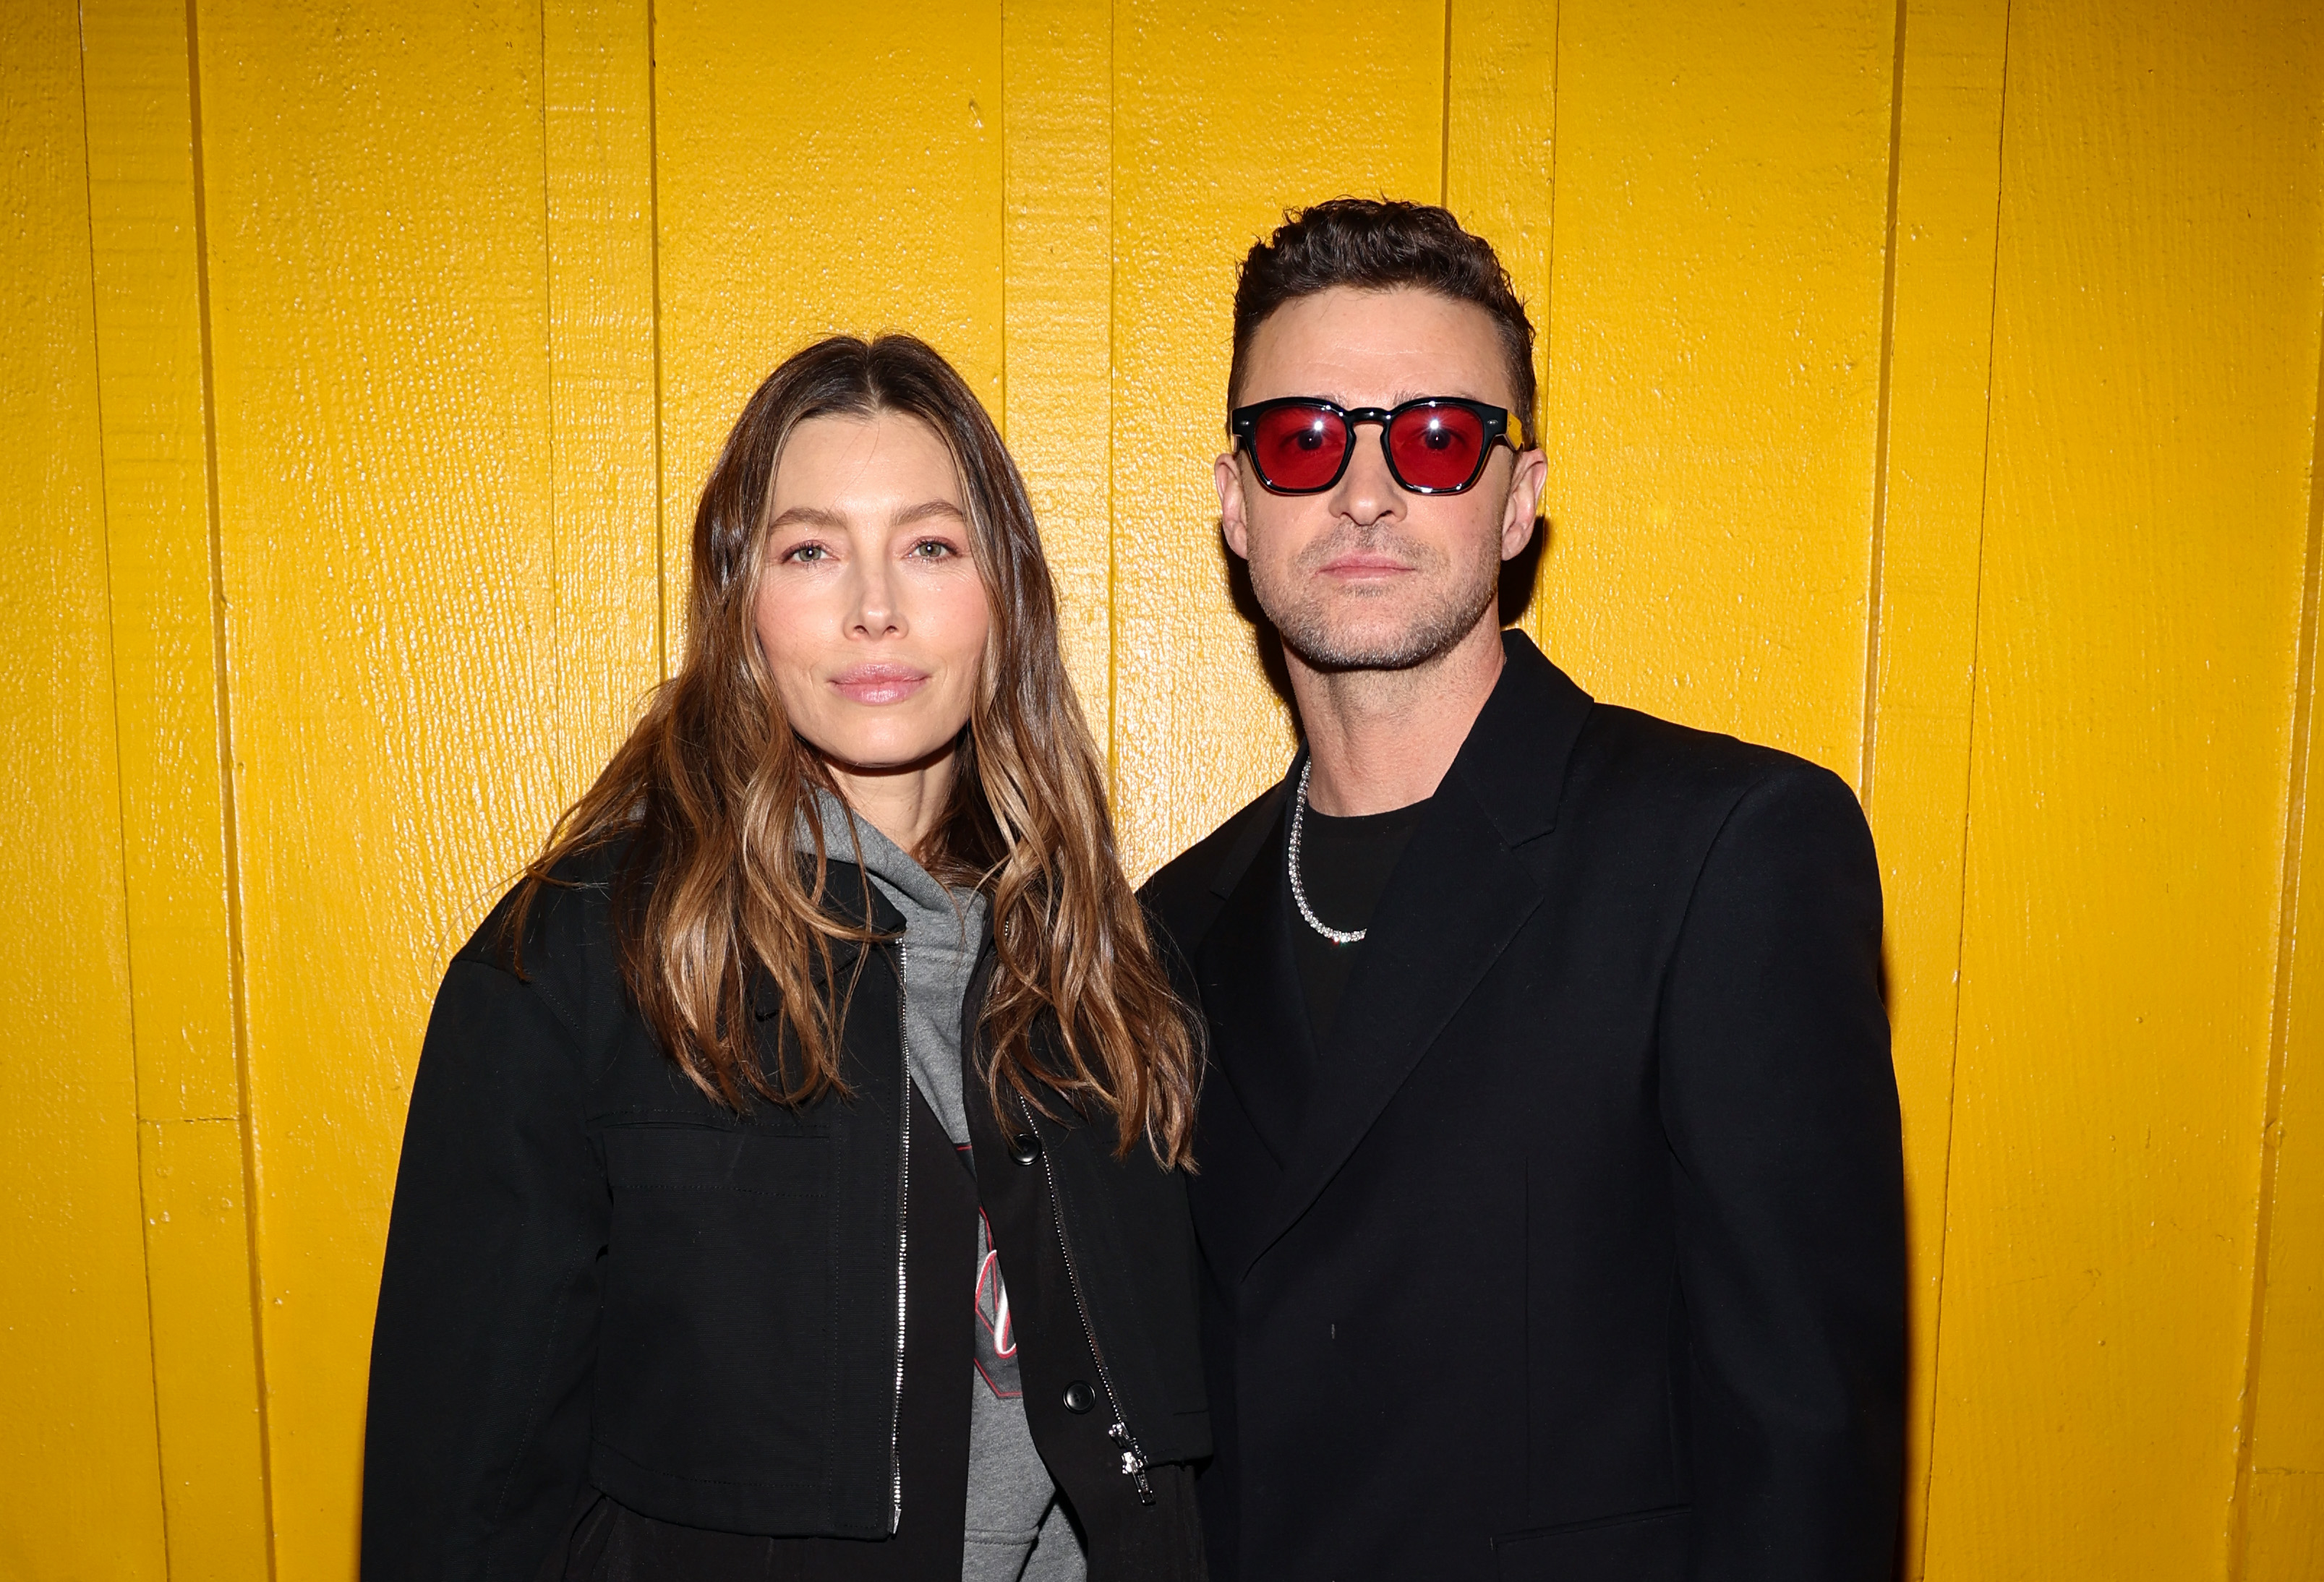 Jessica Biel and Justin Timberlake pose together, both in stylish black jackets, with Justin wearing red sunglasses